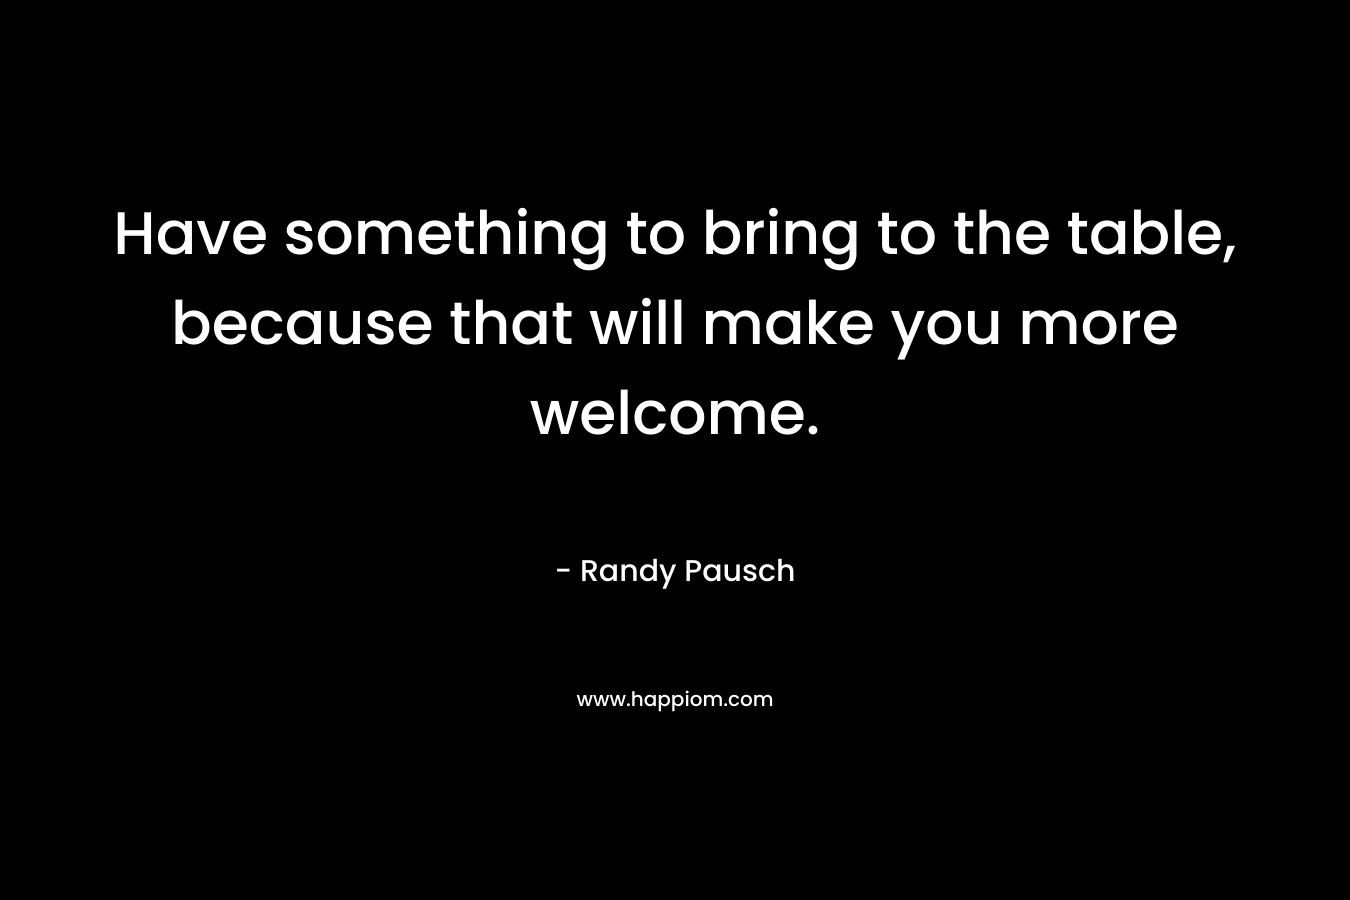 Have something to bring to the table, because that will make you more welcome. – Randy Pausch